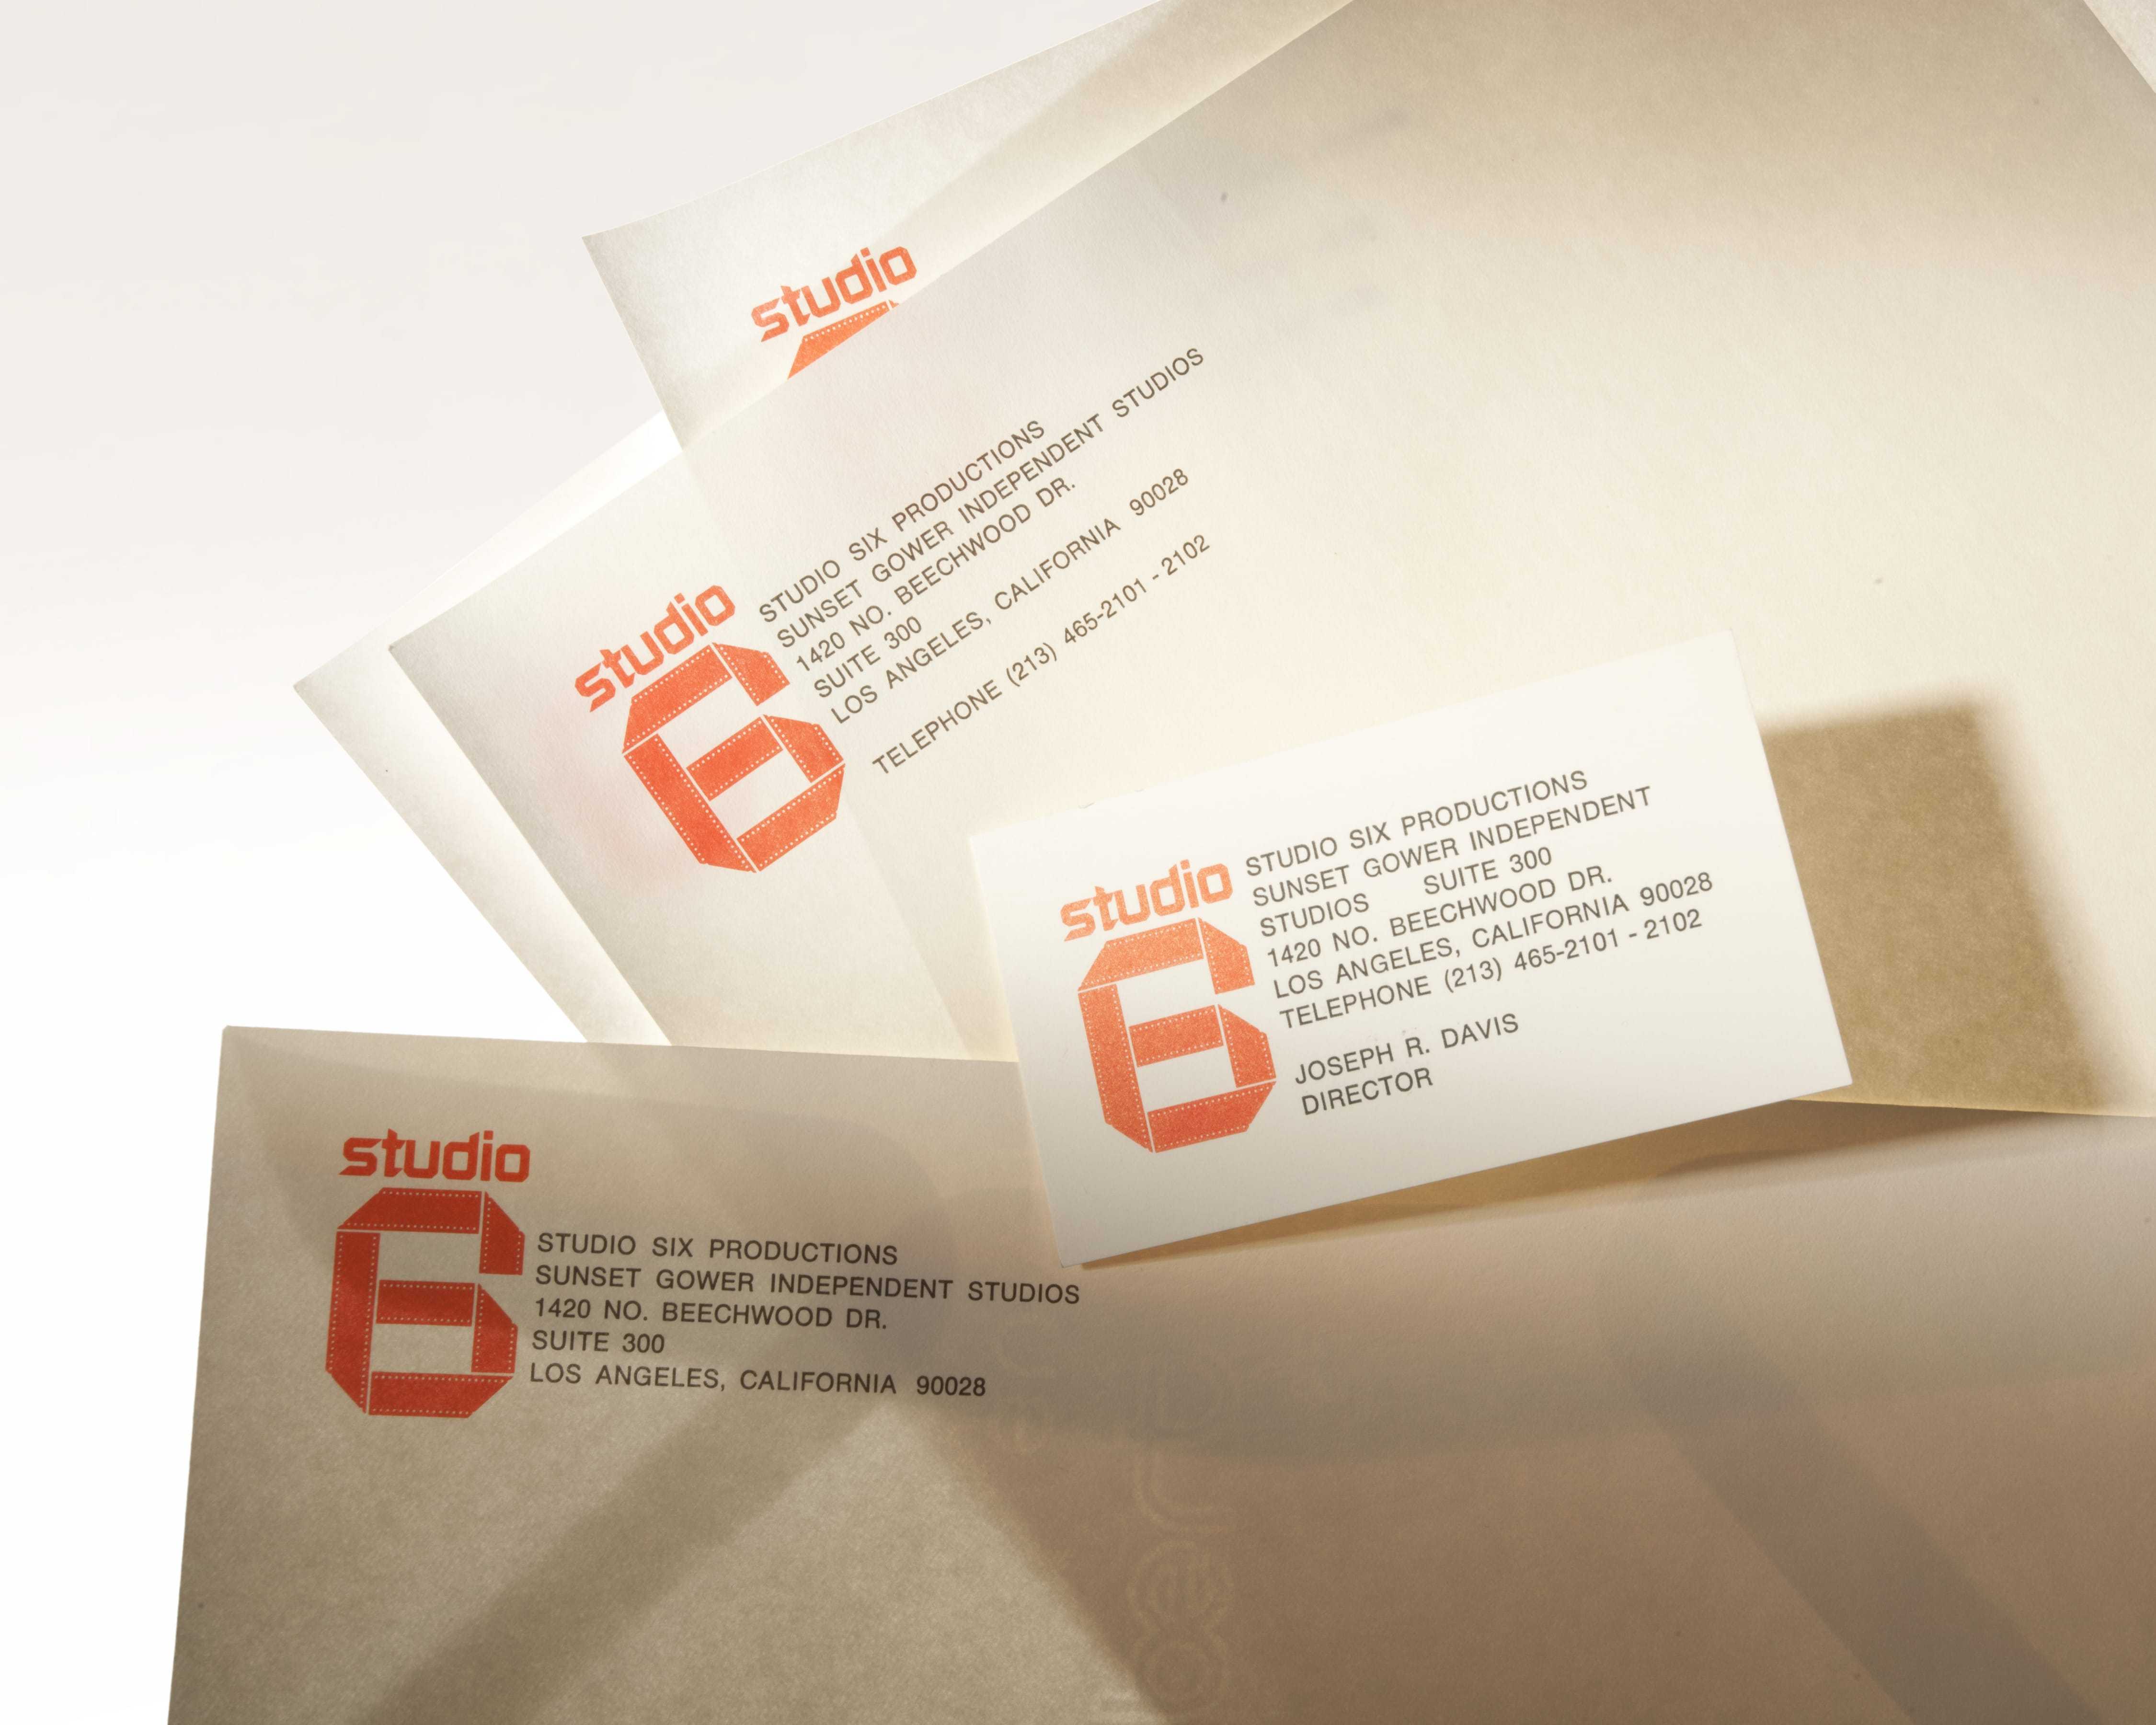 Business cards with the Studio Six logo and information